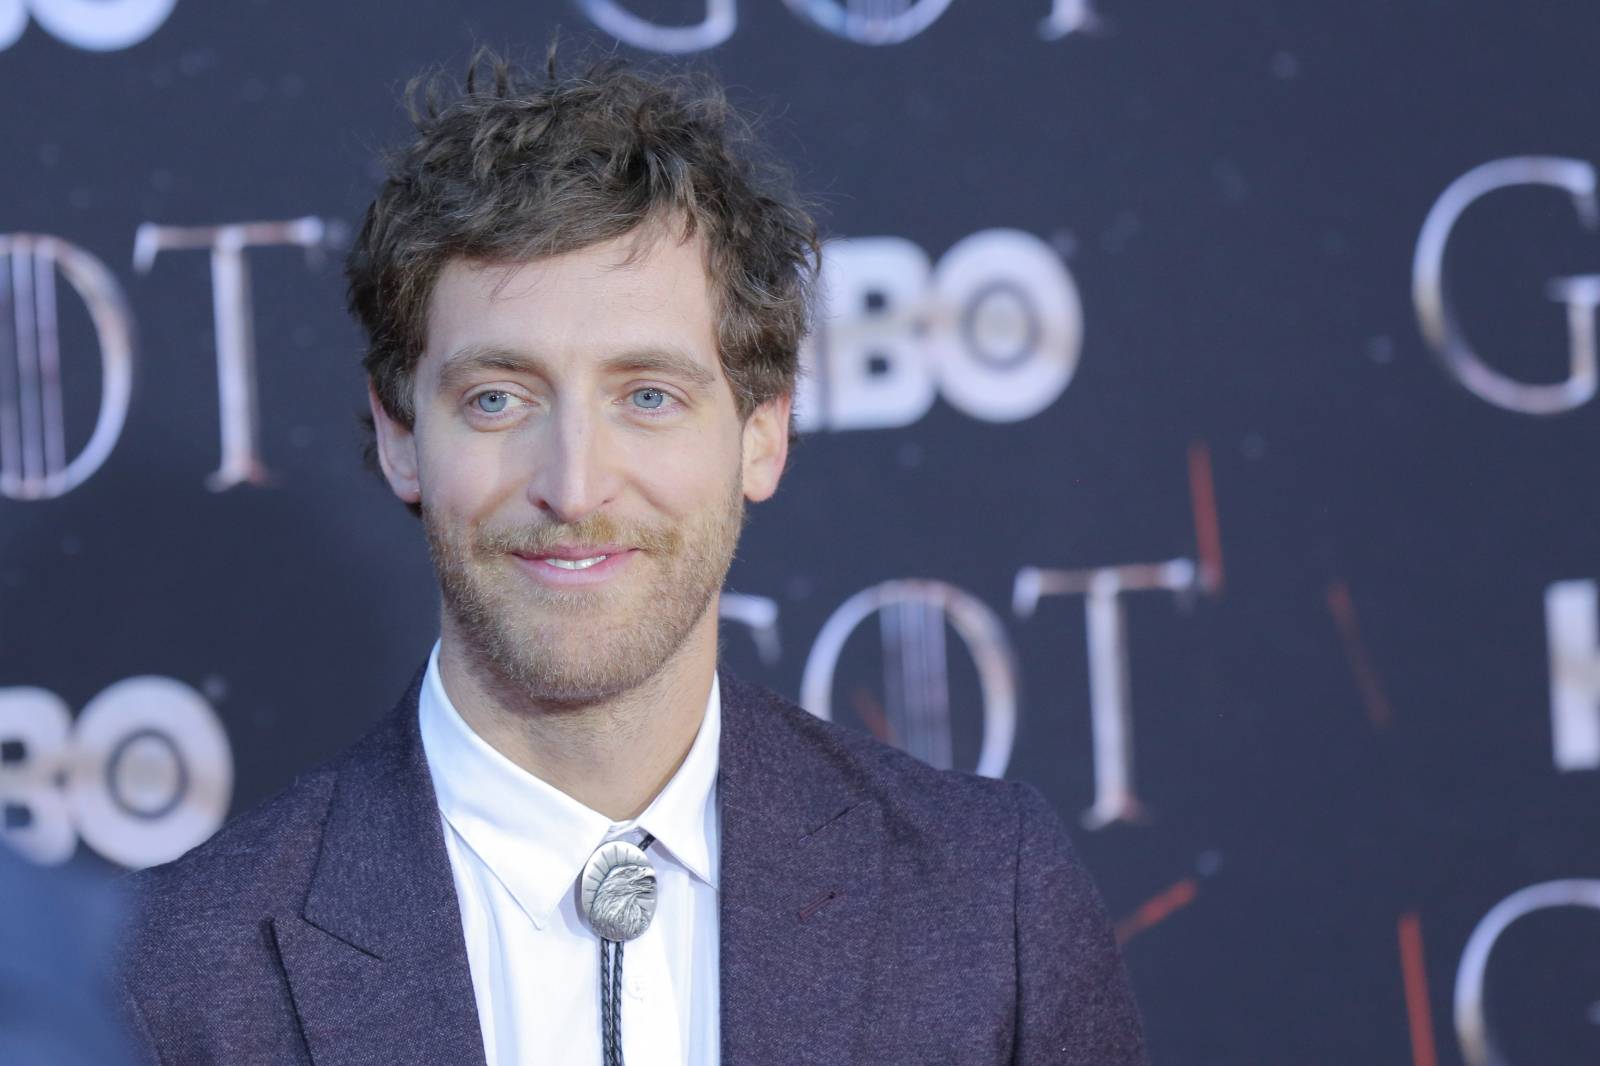 Thomas Middleditch arrives for the premiere of the final season of "Game of Thrones" at Radio City Music Hall in New York